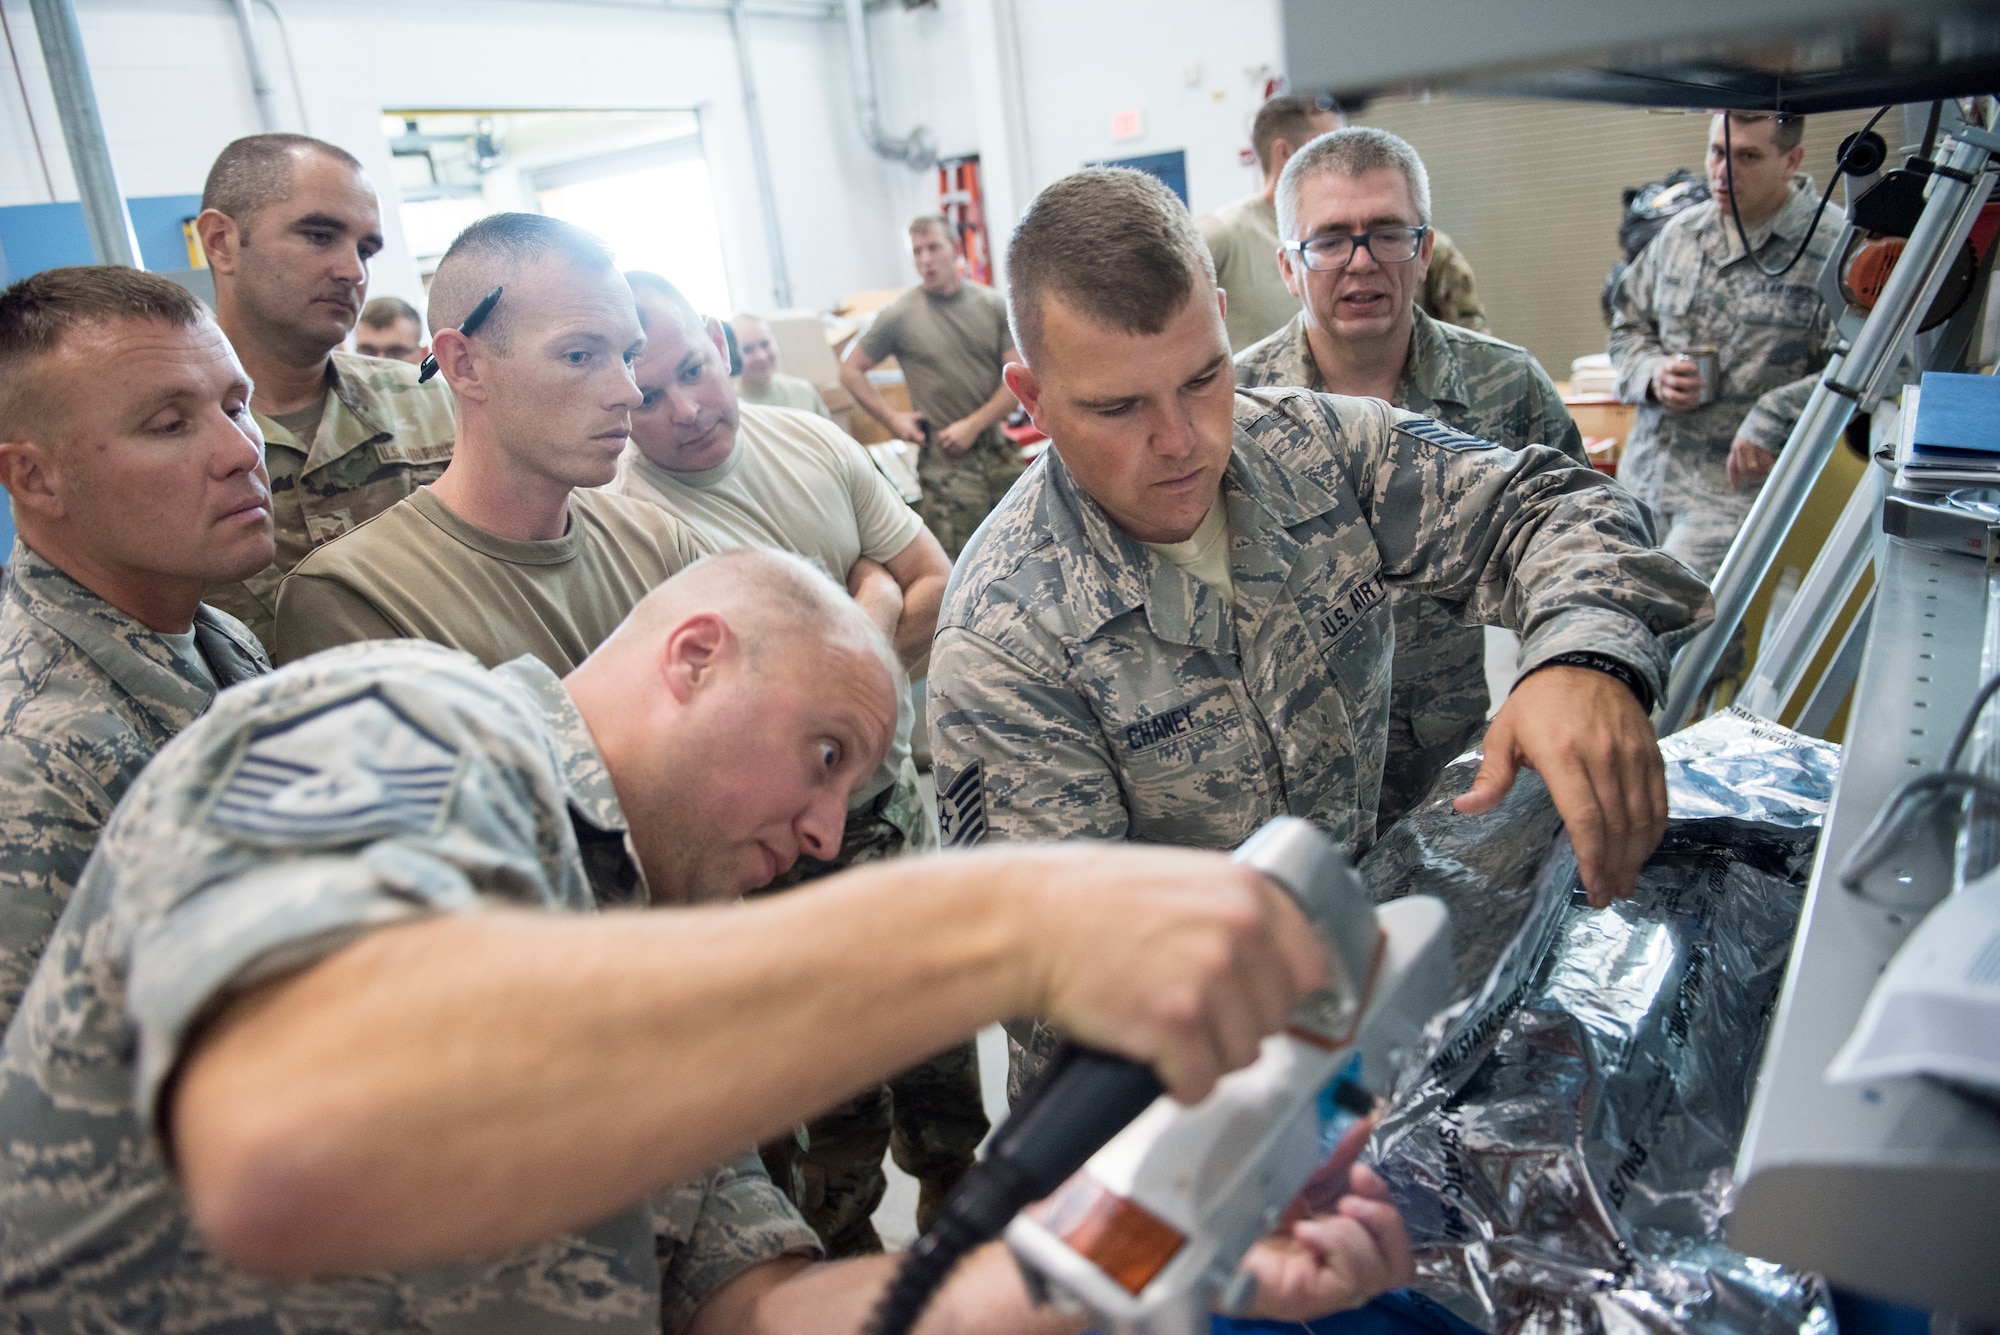 167th Airlift Wing aircraft maintainers, Master Sgt. David Miller, Tech. Sgt. Corey Chaney and Master Sgt. Michael Bowman demonstrate proper packing procedures for electrostatic discharge sensitive aircraft parts to 167th Logistics Readiness Squadron Airmen, Sept. 5, 2019. Airmen assigned to the 167th Airlift Wing helped reset the Air Force program that guides the packing procedures. (U.S. Air National Guard photo by Senior Master Sgt. Emily Beightol-Deyerle)